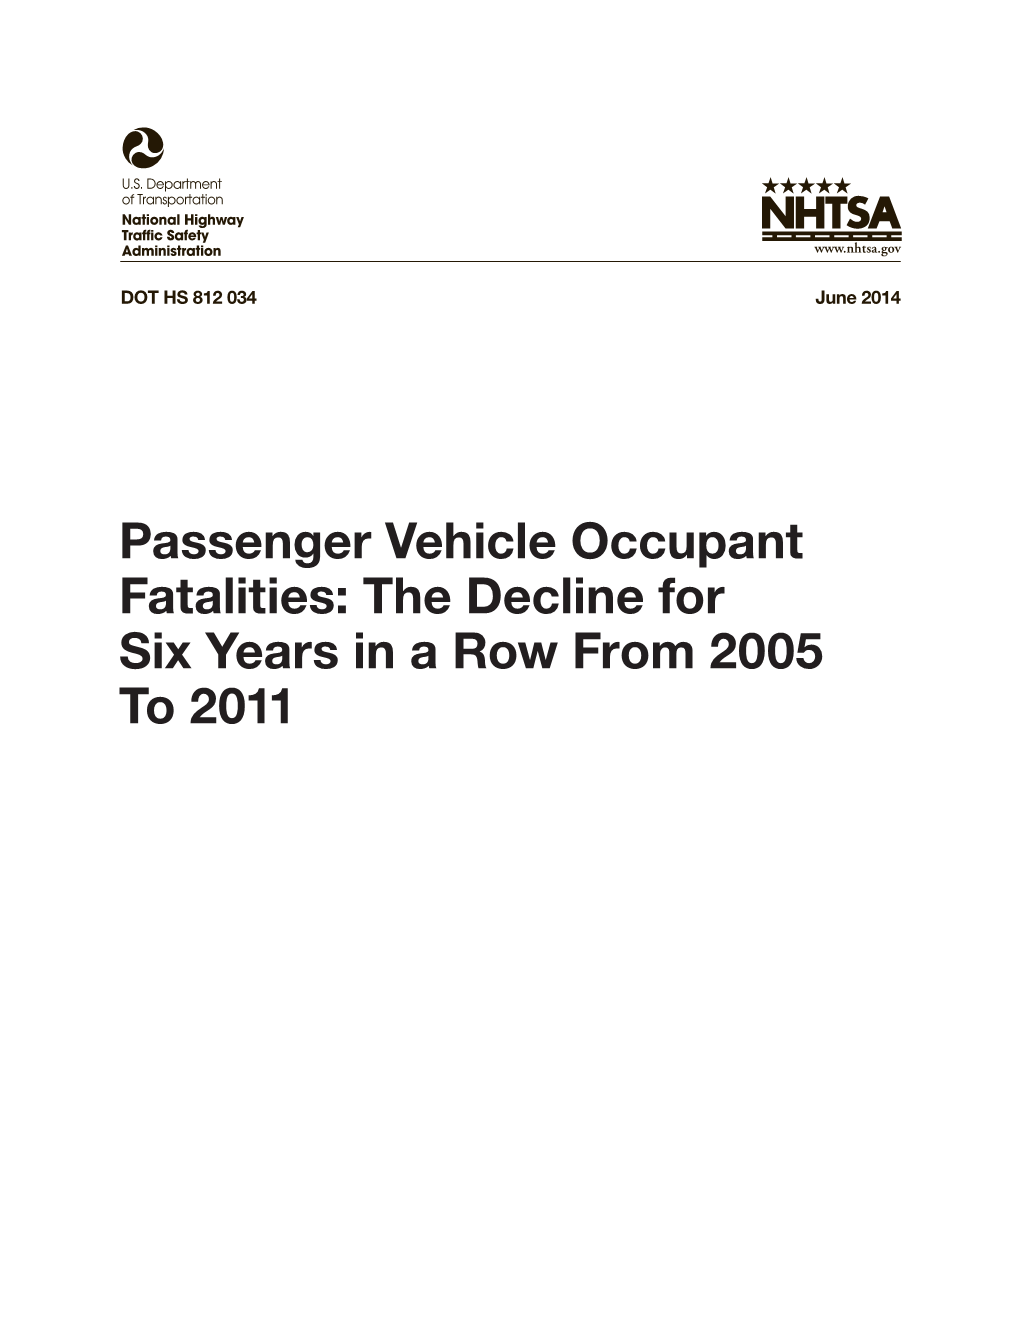 Passenger Vehicle Occupant Fatalities: the Decline for Six Years in a Row from 2005 to 2011 DISCLAIMER